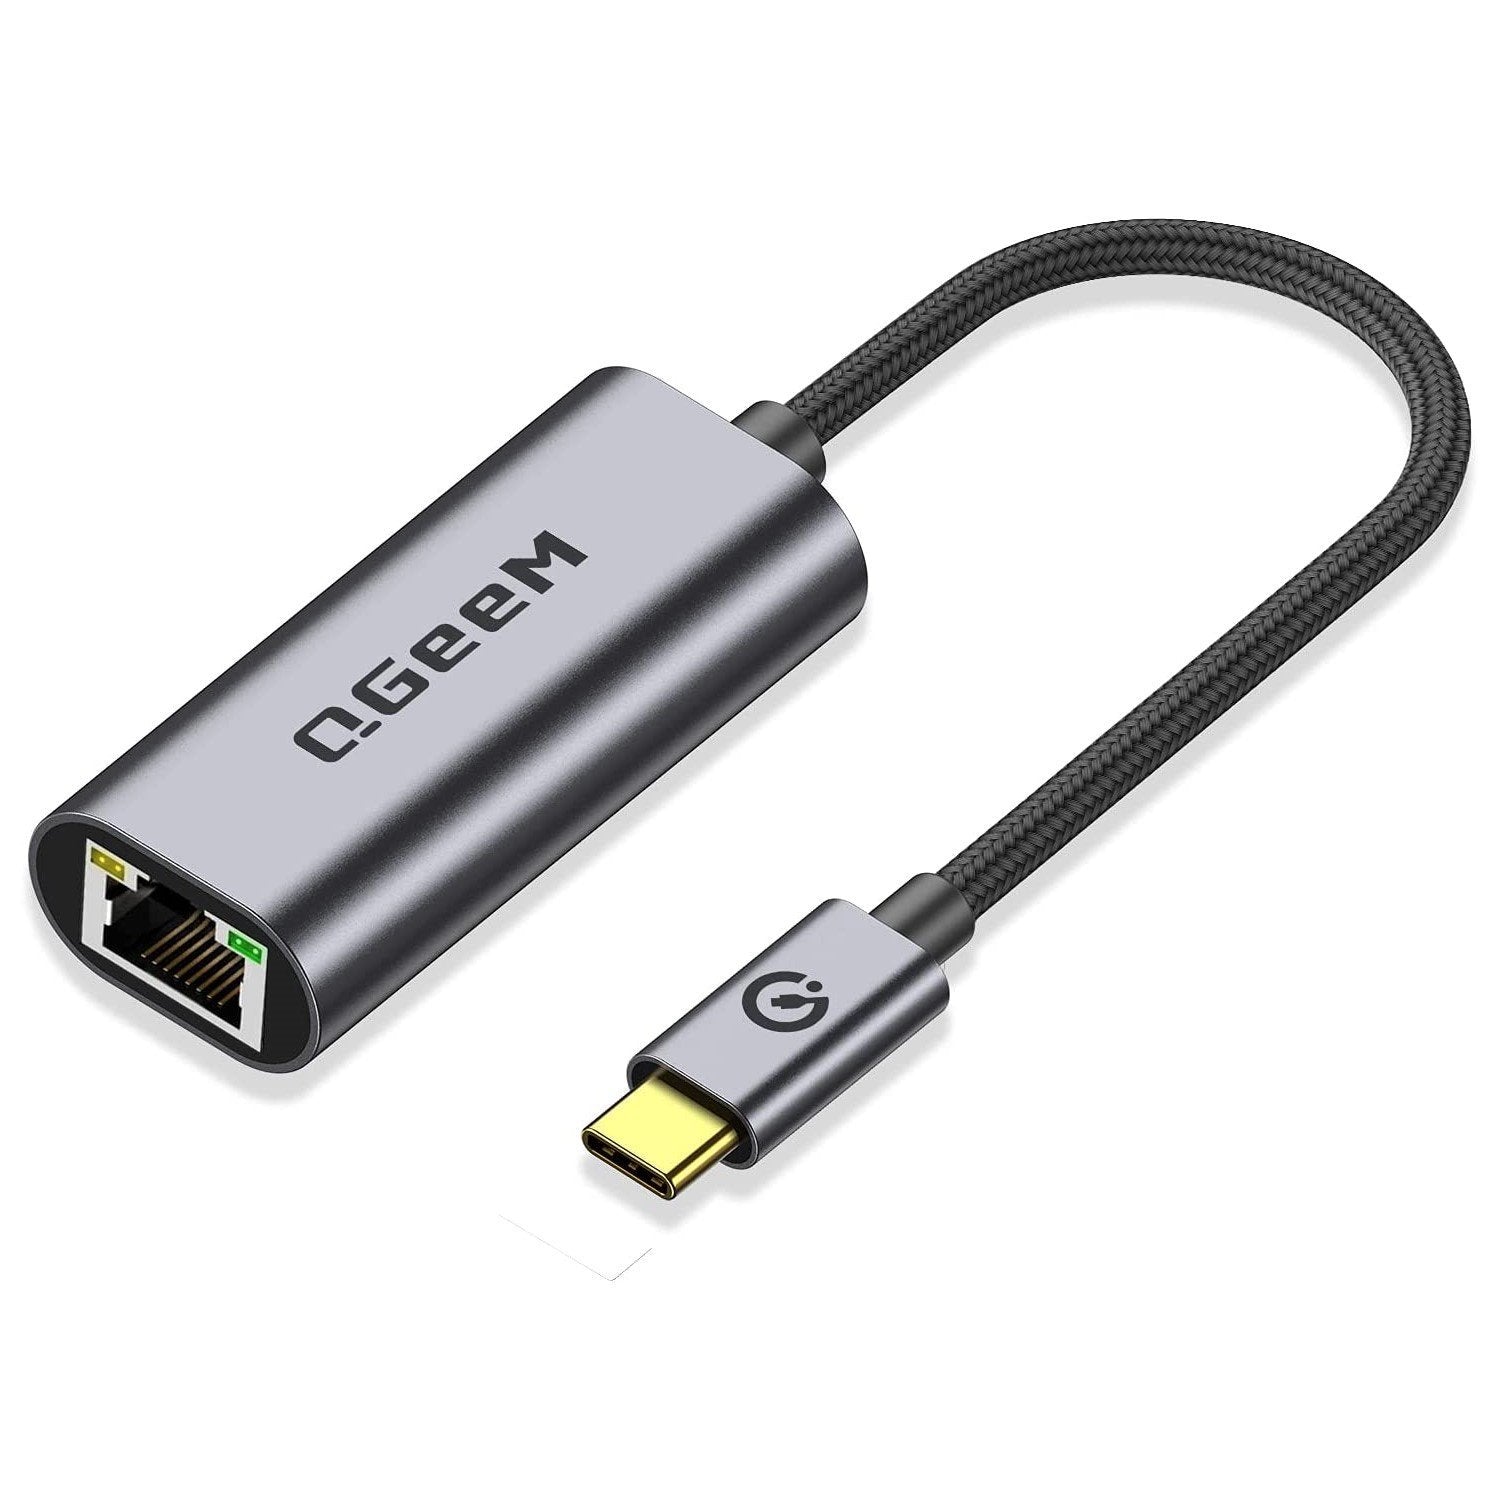 Cable Matters 4-in-1 USB C Hub Ethernet, Support Gigabit Ethernet (USB C  Network, USB C to Ethernet Adapter, USB C Ethernet Hub, Thunderbolt  Ethernet